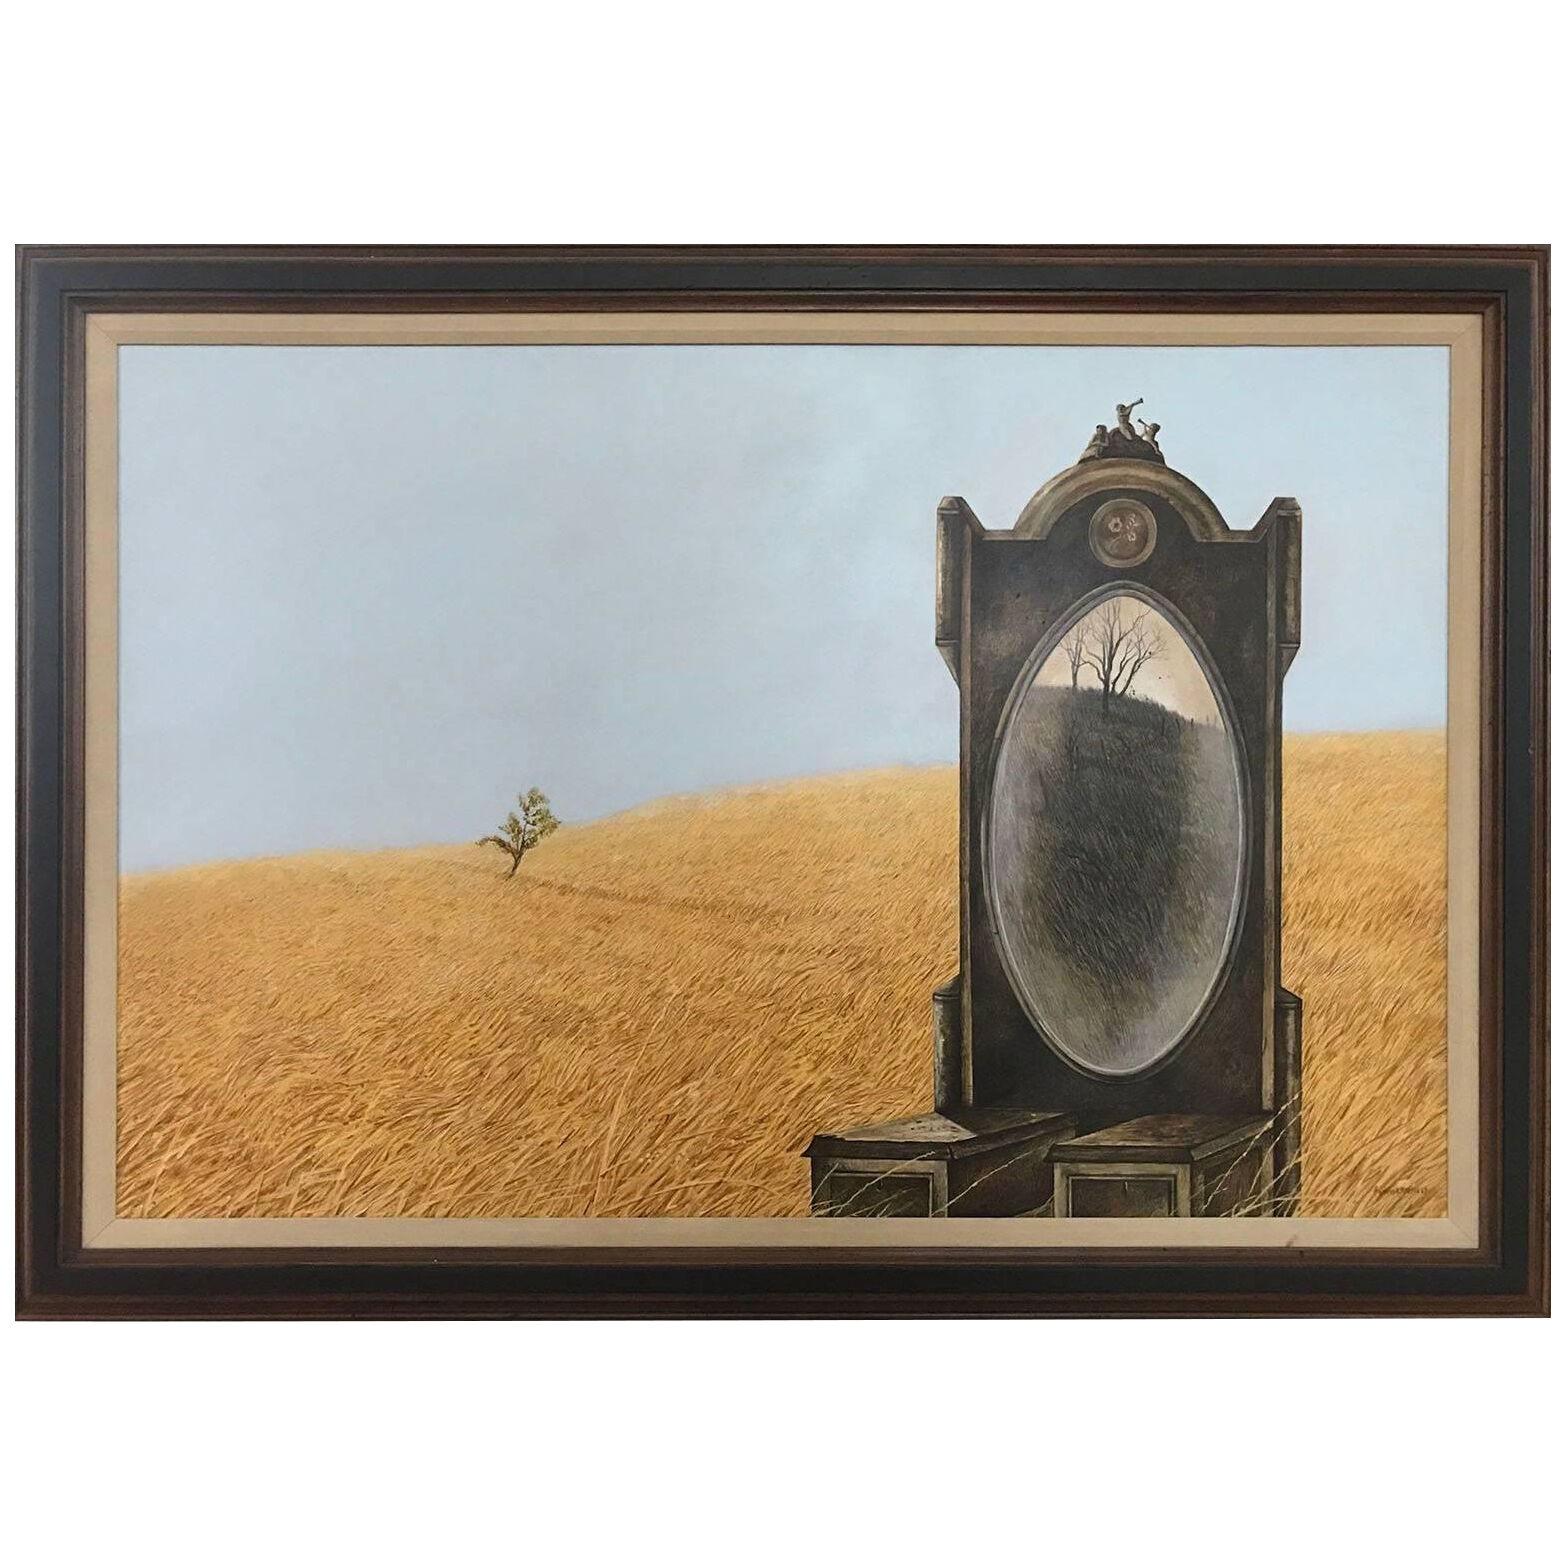 William Anzalone Surreal Painting 'Lonely Mirror in a Field" Egg Tempura